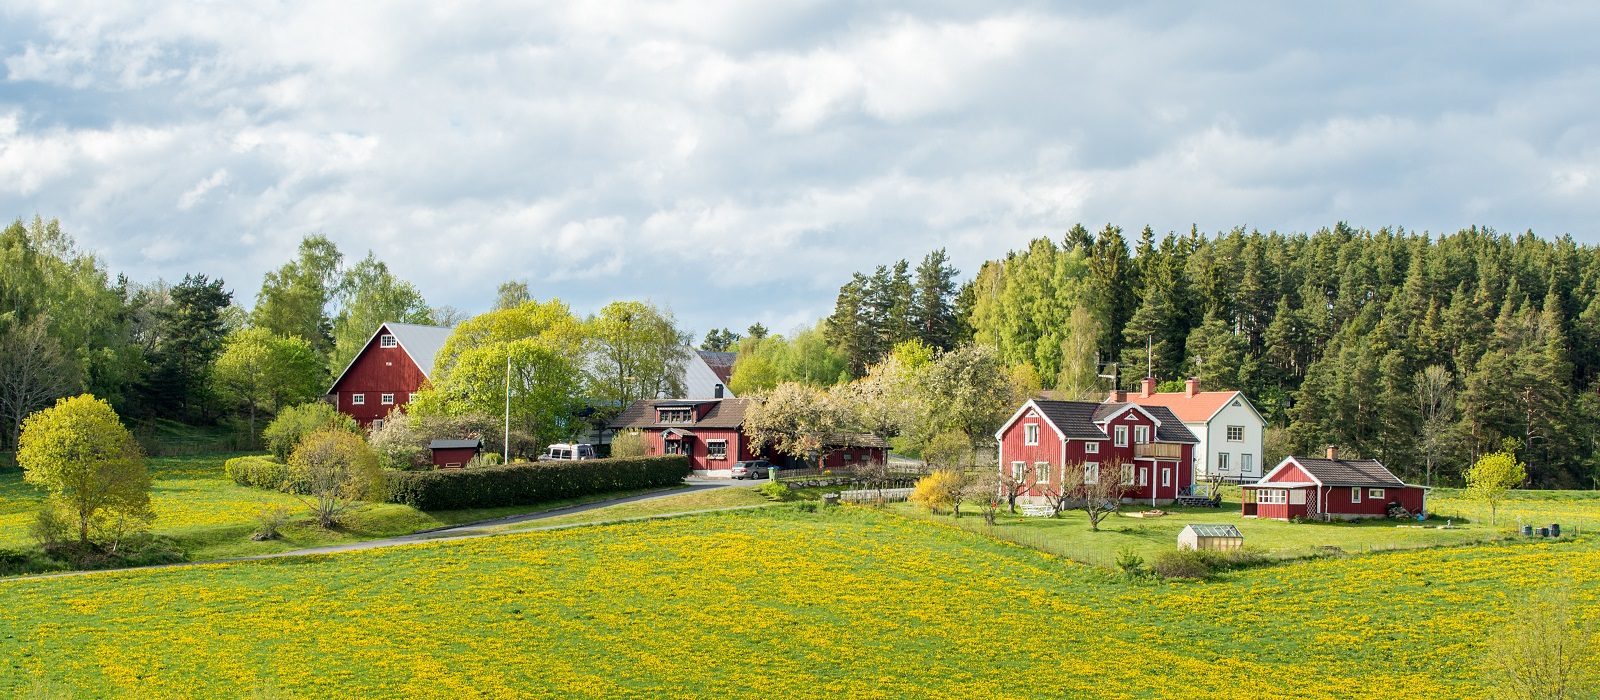 Spring in the countryside of Småland in Sweden